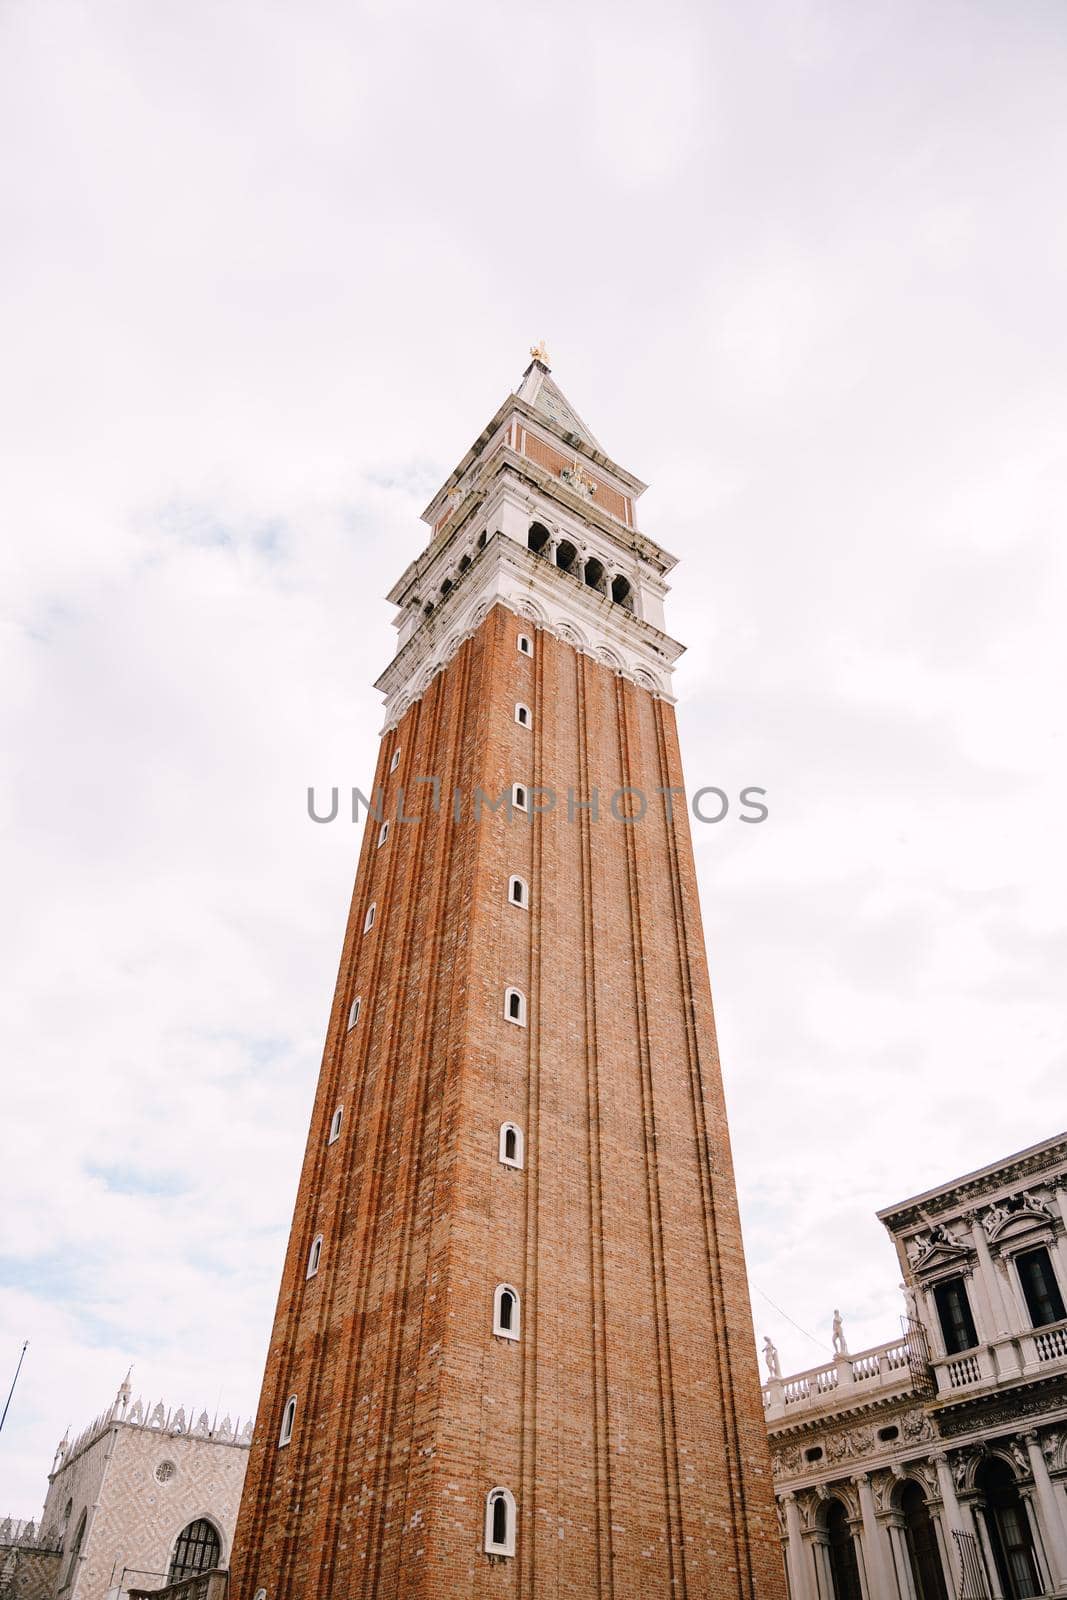 A huge bell tower made of red brick in Piazza San Marco in Venice, Italy. Against background of a cloudy, evening, October sunset sky.